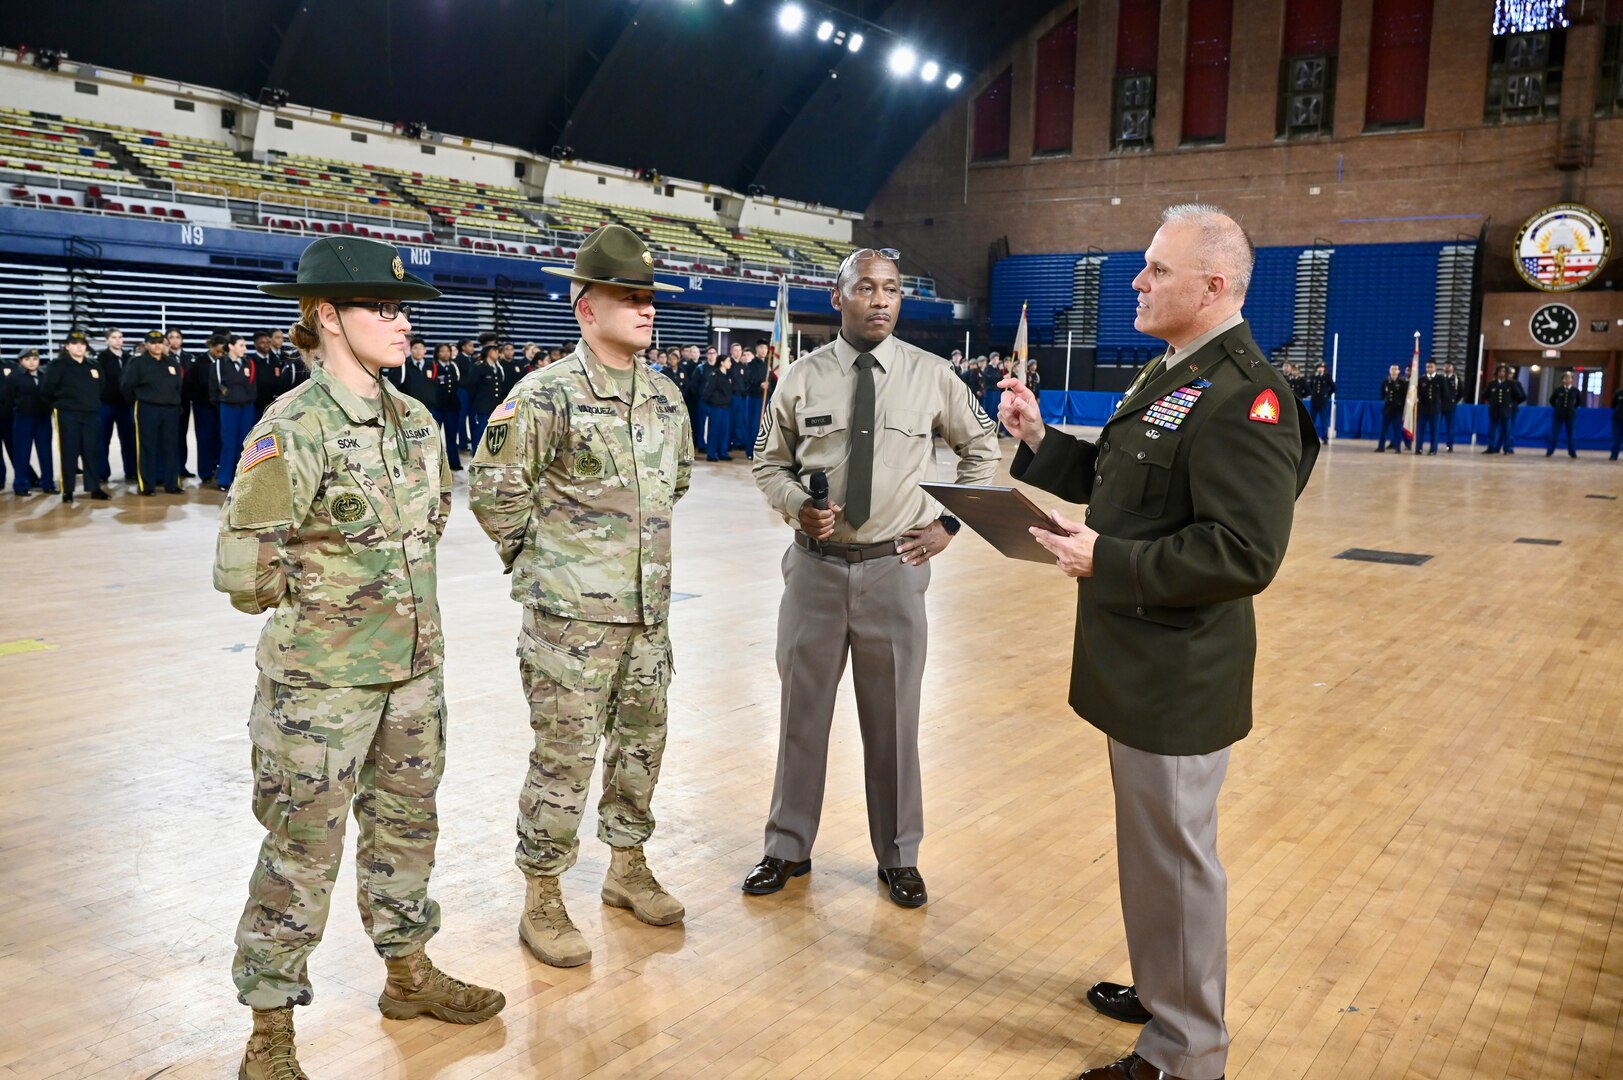 Junior Reserve Officers' Training Corps (JROTC) teams from a dozen D.C. metropolitan area schools competed in the 2024 JROTC “Best of the Best” Drill Competition at the D.C. Armory, Jan. 27, 2024. The regional qualifier is a collaboration between D.C. Public Schools, D.C. Government Operations, and the D.C. National Guard.